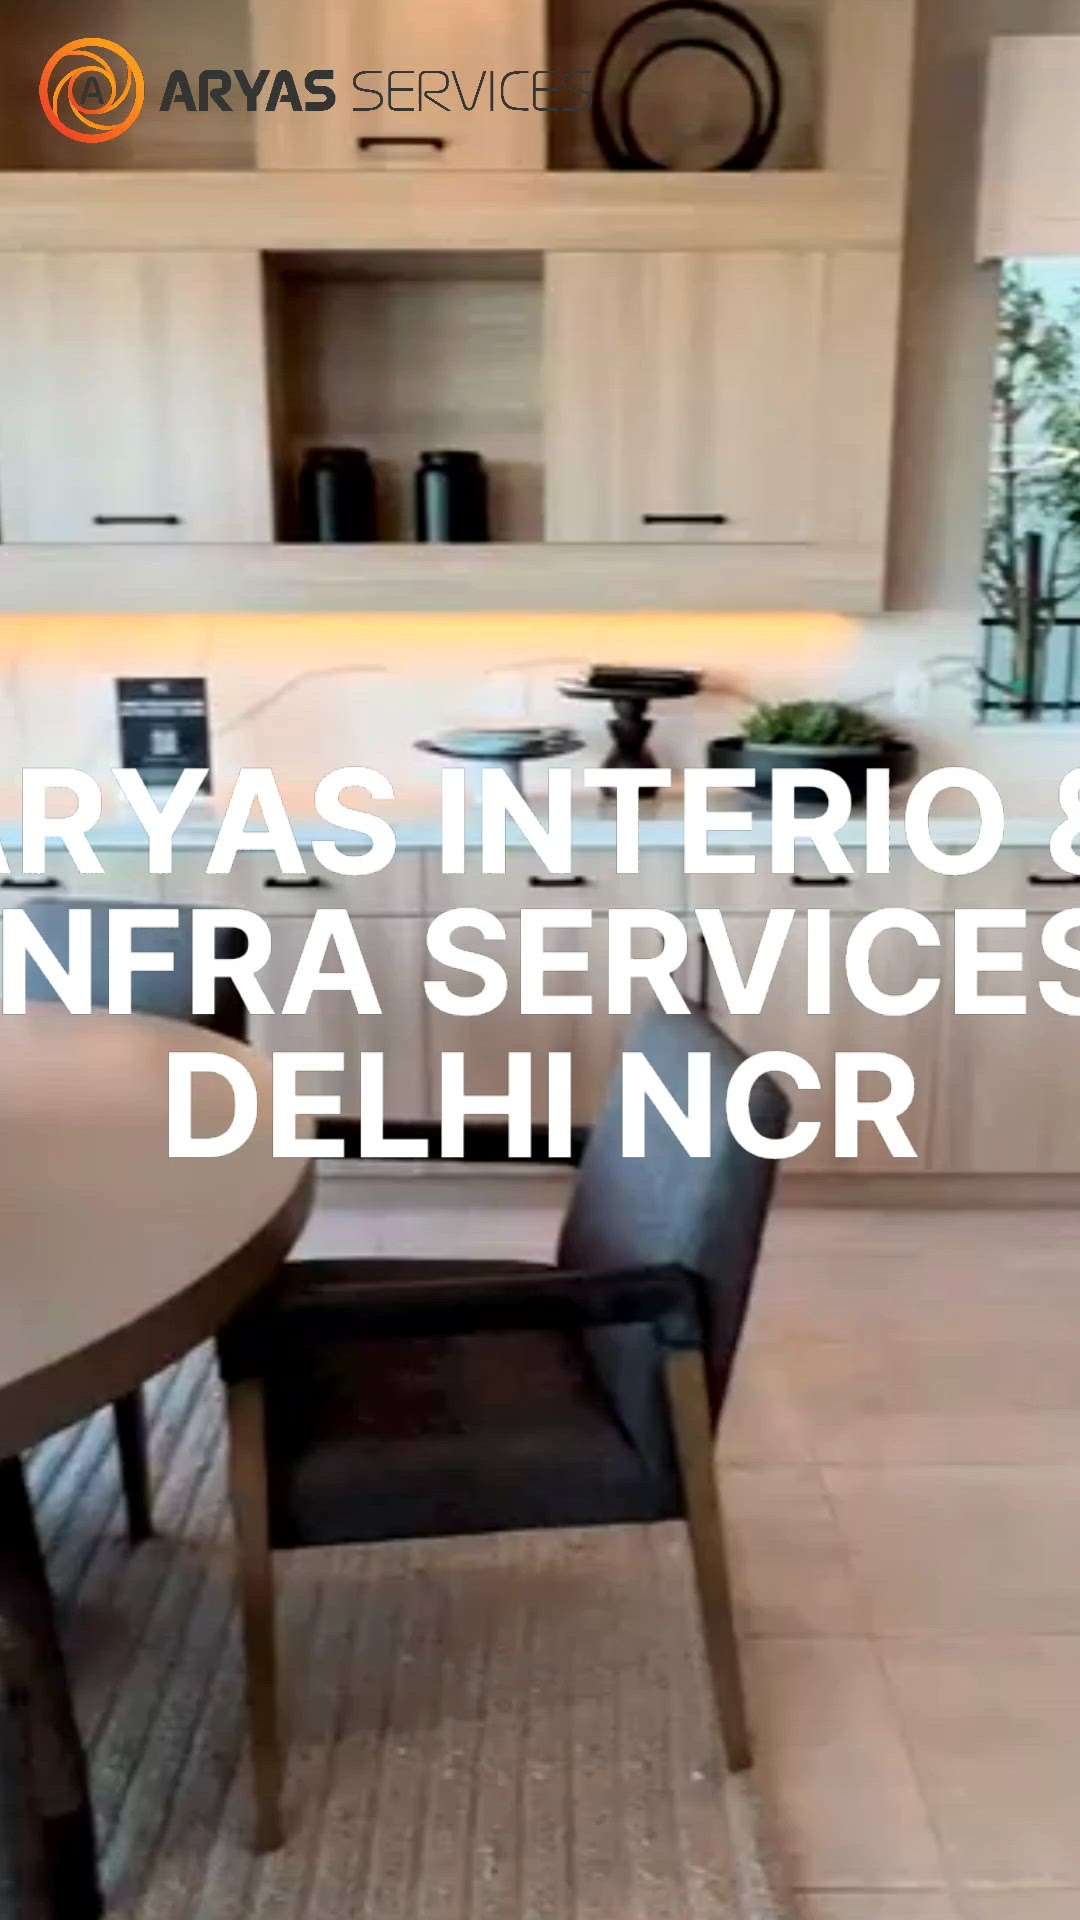 Give your home a new look, luxury flat interiors services by Design Interios a unit of Aryas interio & Infra Services,
Provide complete end to end Professional Construction & interior Services in Delhi Ncr, Gurugram, Ghaziabad, Noida, Greater Noida, Faridabad, chandigarh, Manali and Shimla. Contact us right now for any interior or renovation work, call us @ +91-7018188569 &
Visit our website at www.designinterios.com
Follow us on Instagram #aryasinterio and Facebook @aryasinterio .
#uttarpradesh #construction_himachal
#noidainterior #noida #delhincr #delhi #Delhihome  #noidaconstruction #interiordesign #interior #interiors #interiordesigner #interiordecor #interiorstyling #delhiinteriors #greaternoida #faridabad #ghaziabadinterior #ghaziabad  #chandigarh